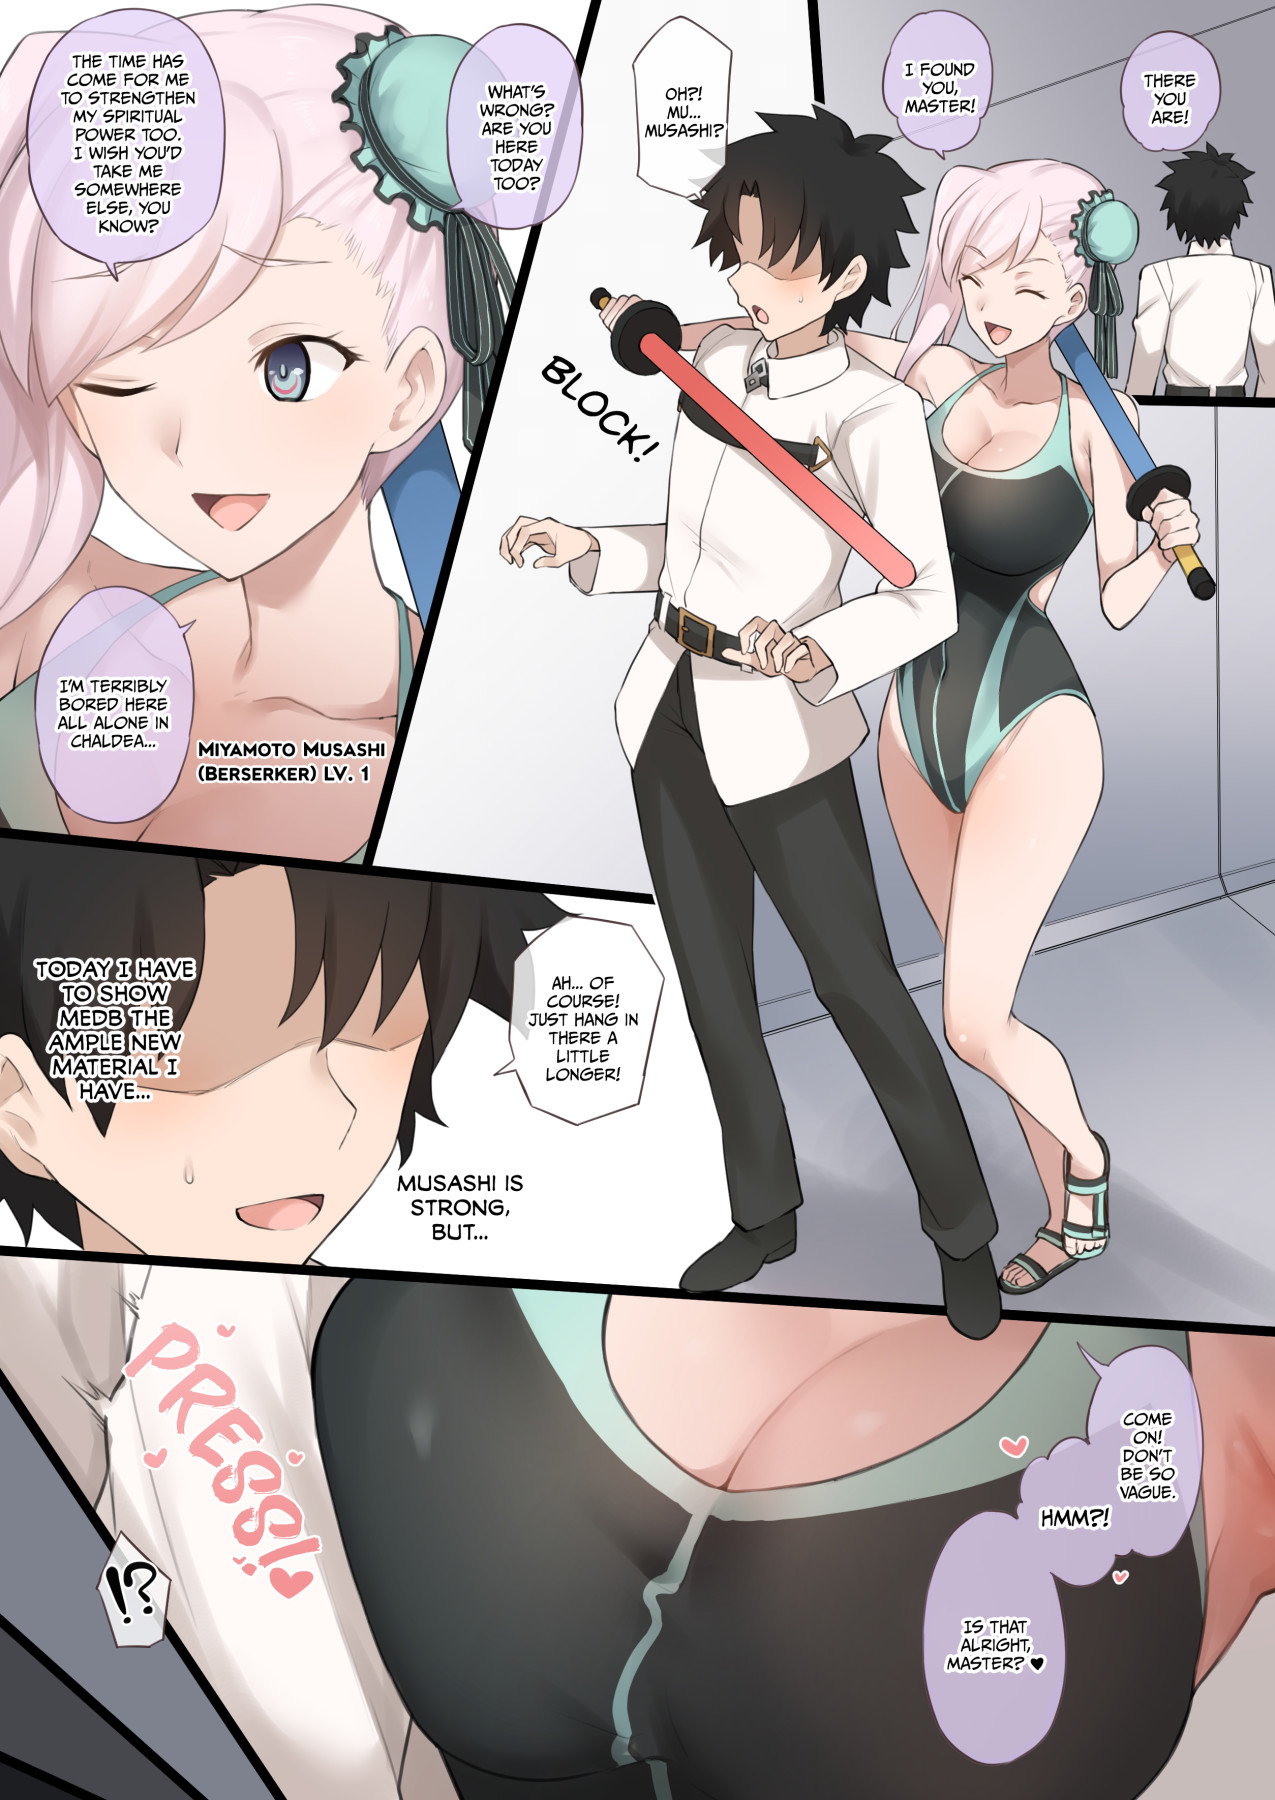 hentai manga A Story About Musashi In a Swimsuit Getting NTR Fucked By Big Black Cocks